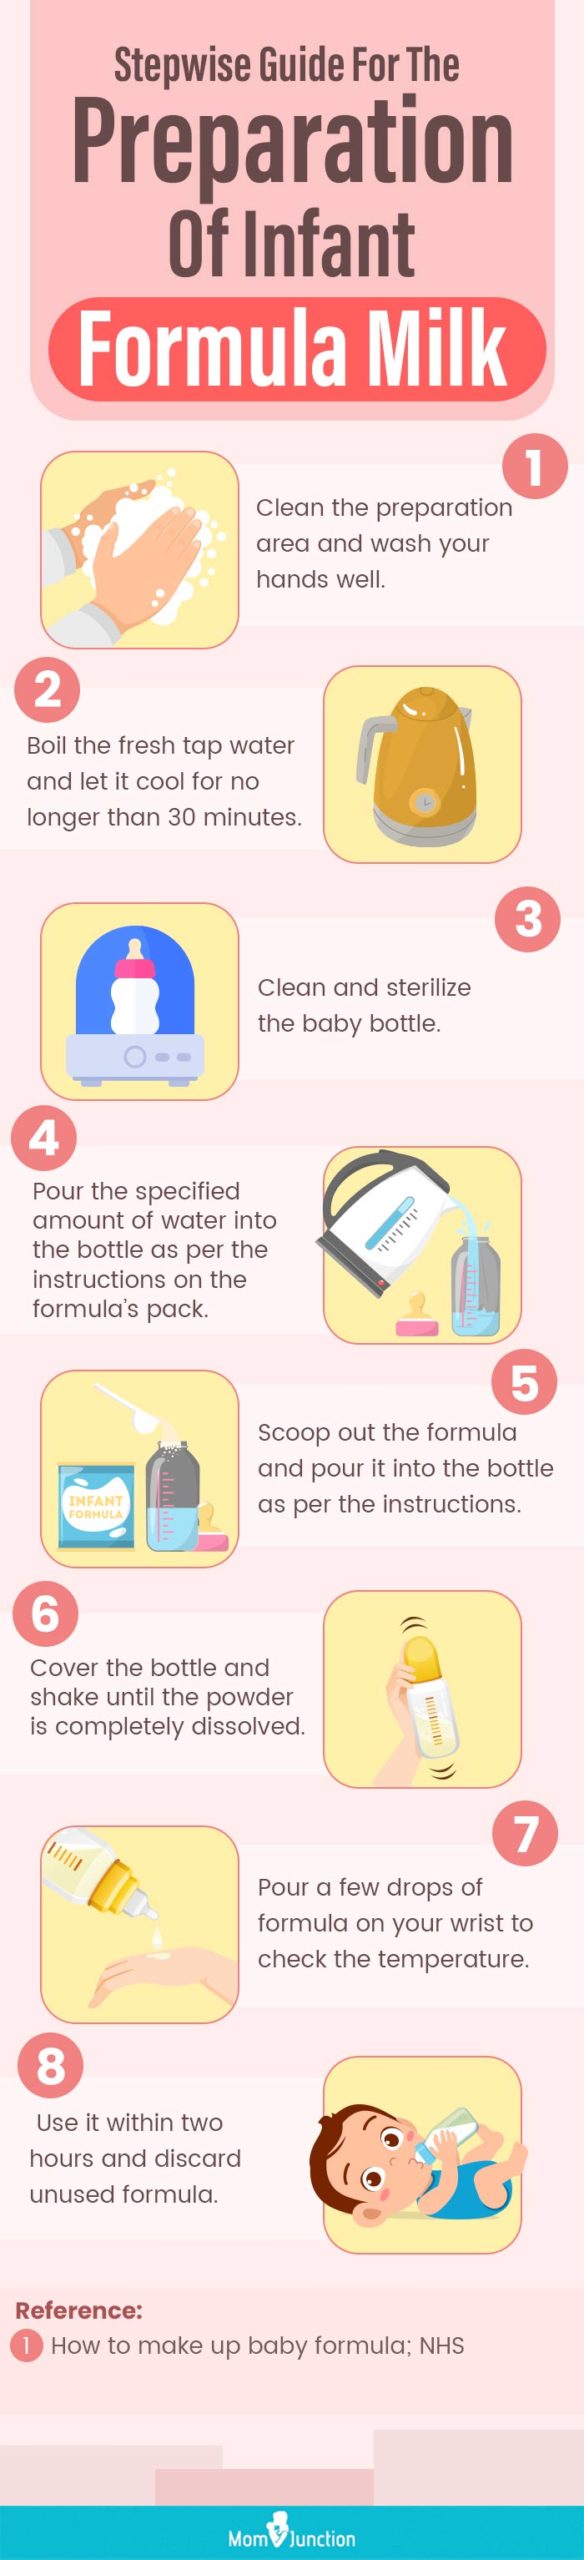 stepwise guide for the preparation of infant formula milk (infographic)